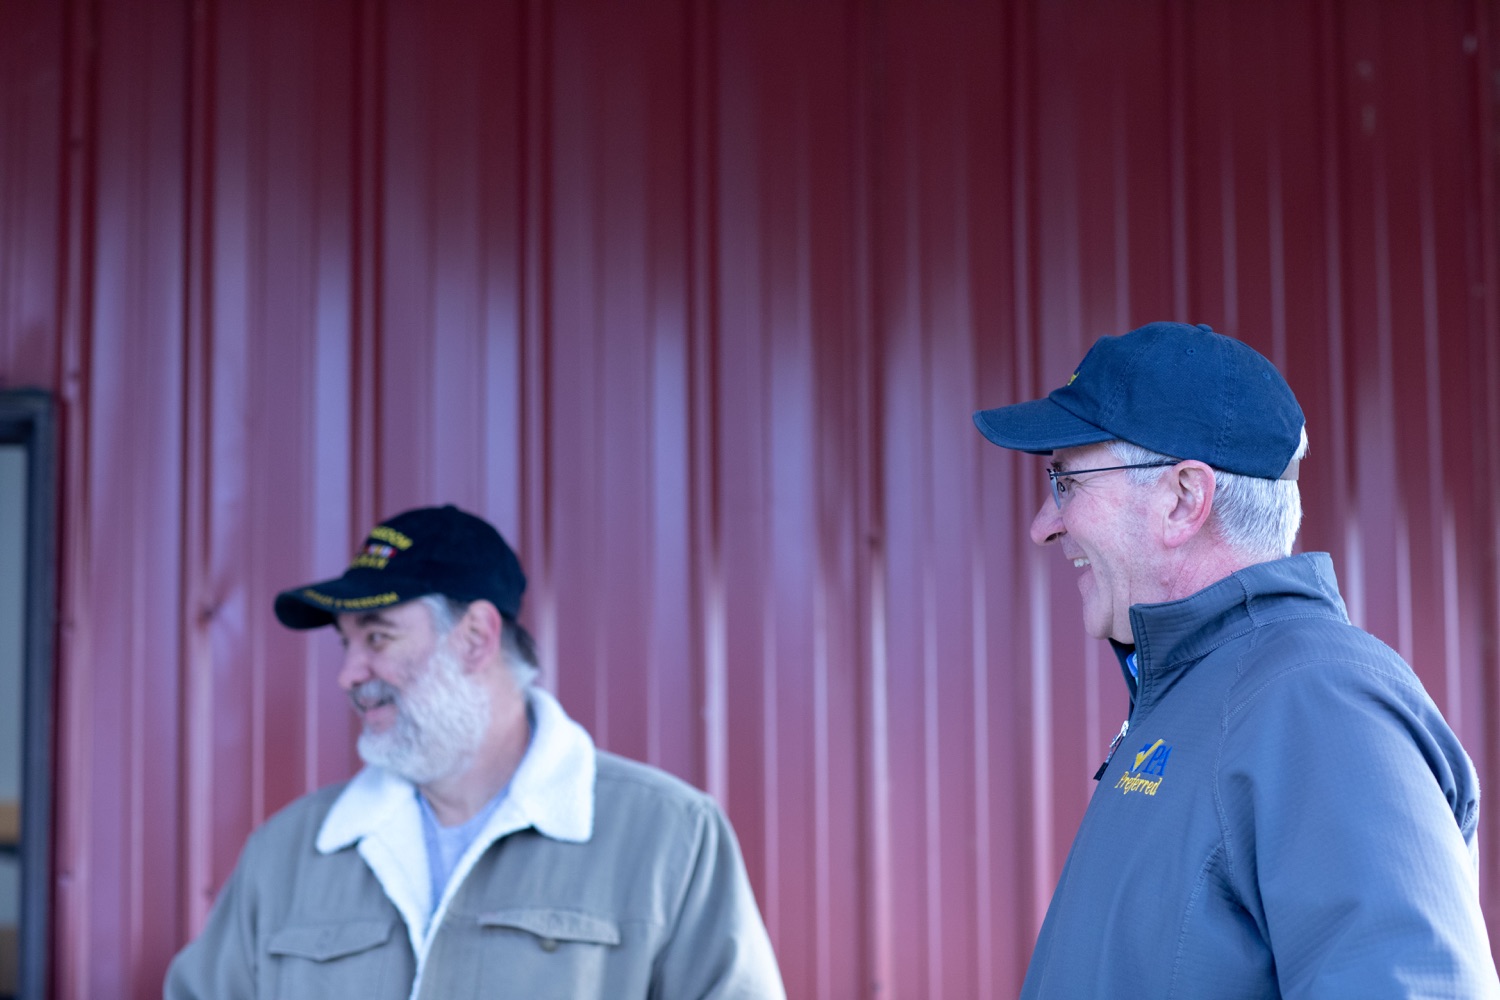 Larry Daugherty, US Army veteran and proprietor of Heritage Farms speaks with Agriculture Secretary Russell Redding. Agriculture Secretary Russell Redding and Brigadier General Mark Goodwill joined veterans and partners during visits to veteran-owned farms in Allegheny and Fayette counties. During the tours, Redding thanked farmer veterans for continuing to serve their communities through agriculture after returning from military service. November, 30, 2022 - McClellandtown, Fayette Co, PA.<br><a href="https://filesource.amperwave.net/commonwealthofpa/photo/22350_ag_workforceWeek_31.jpeg" target="_blank">⇣ Download Photo</a>